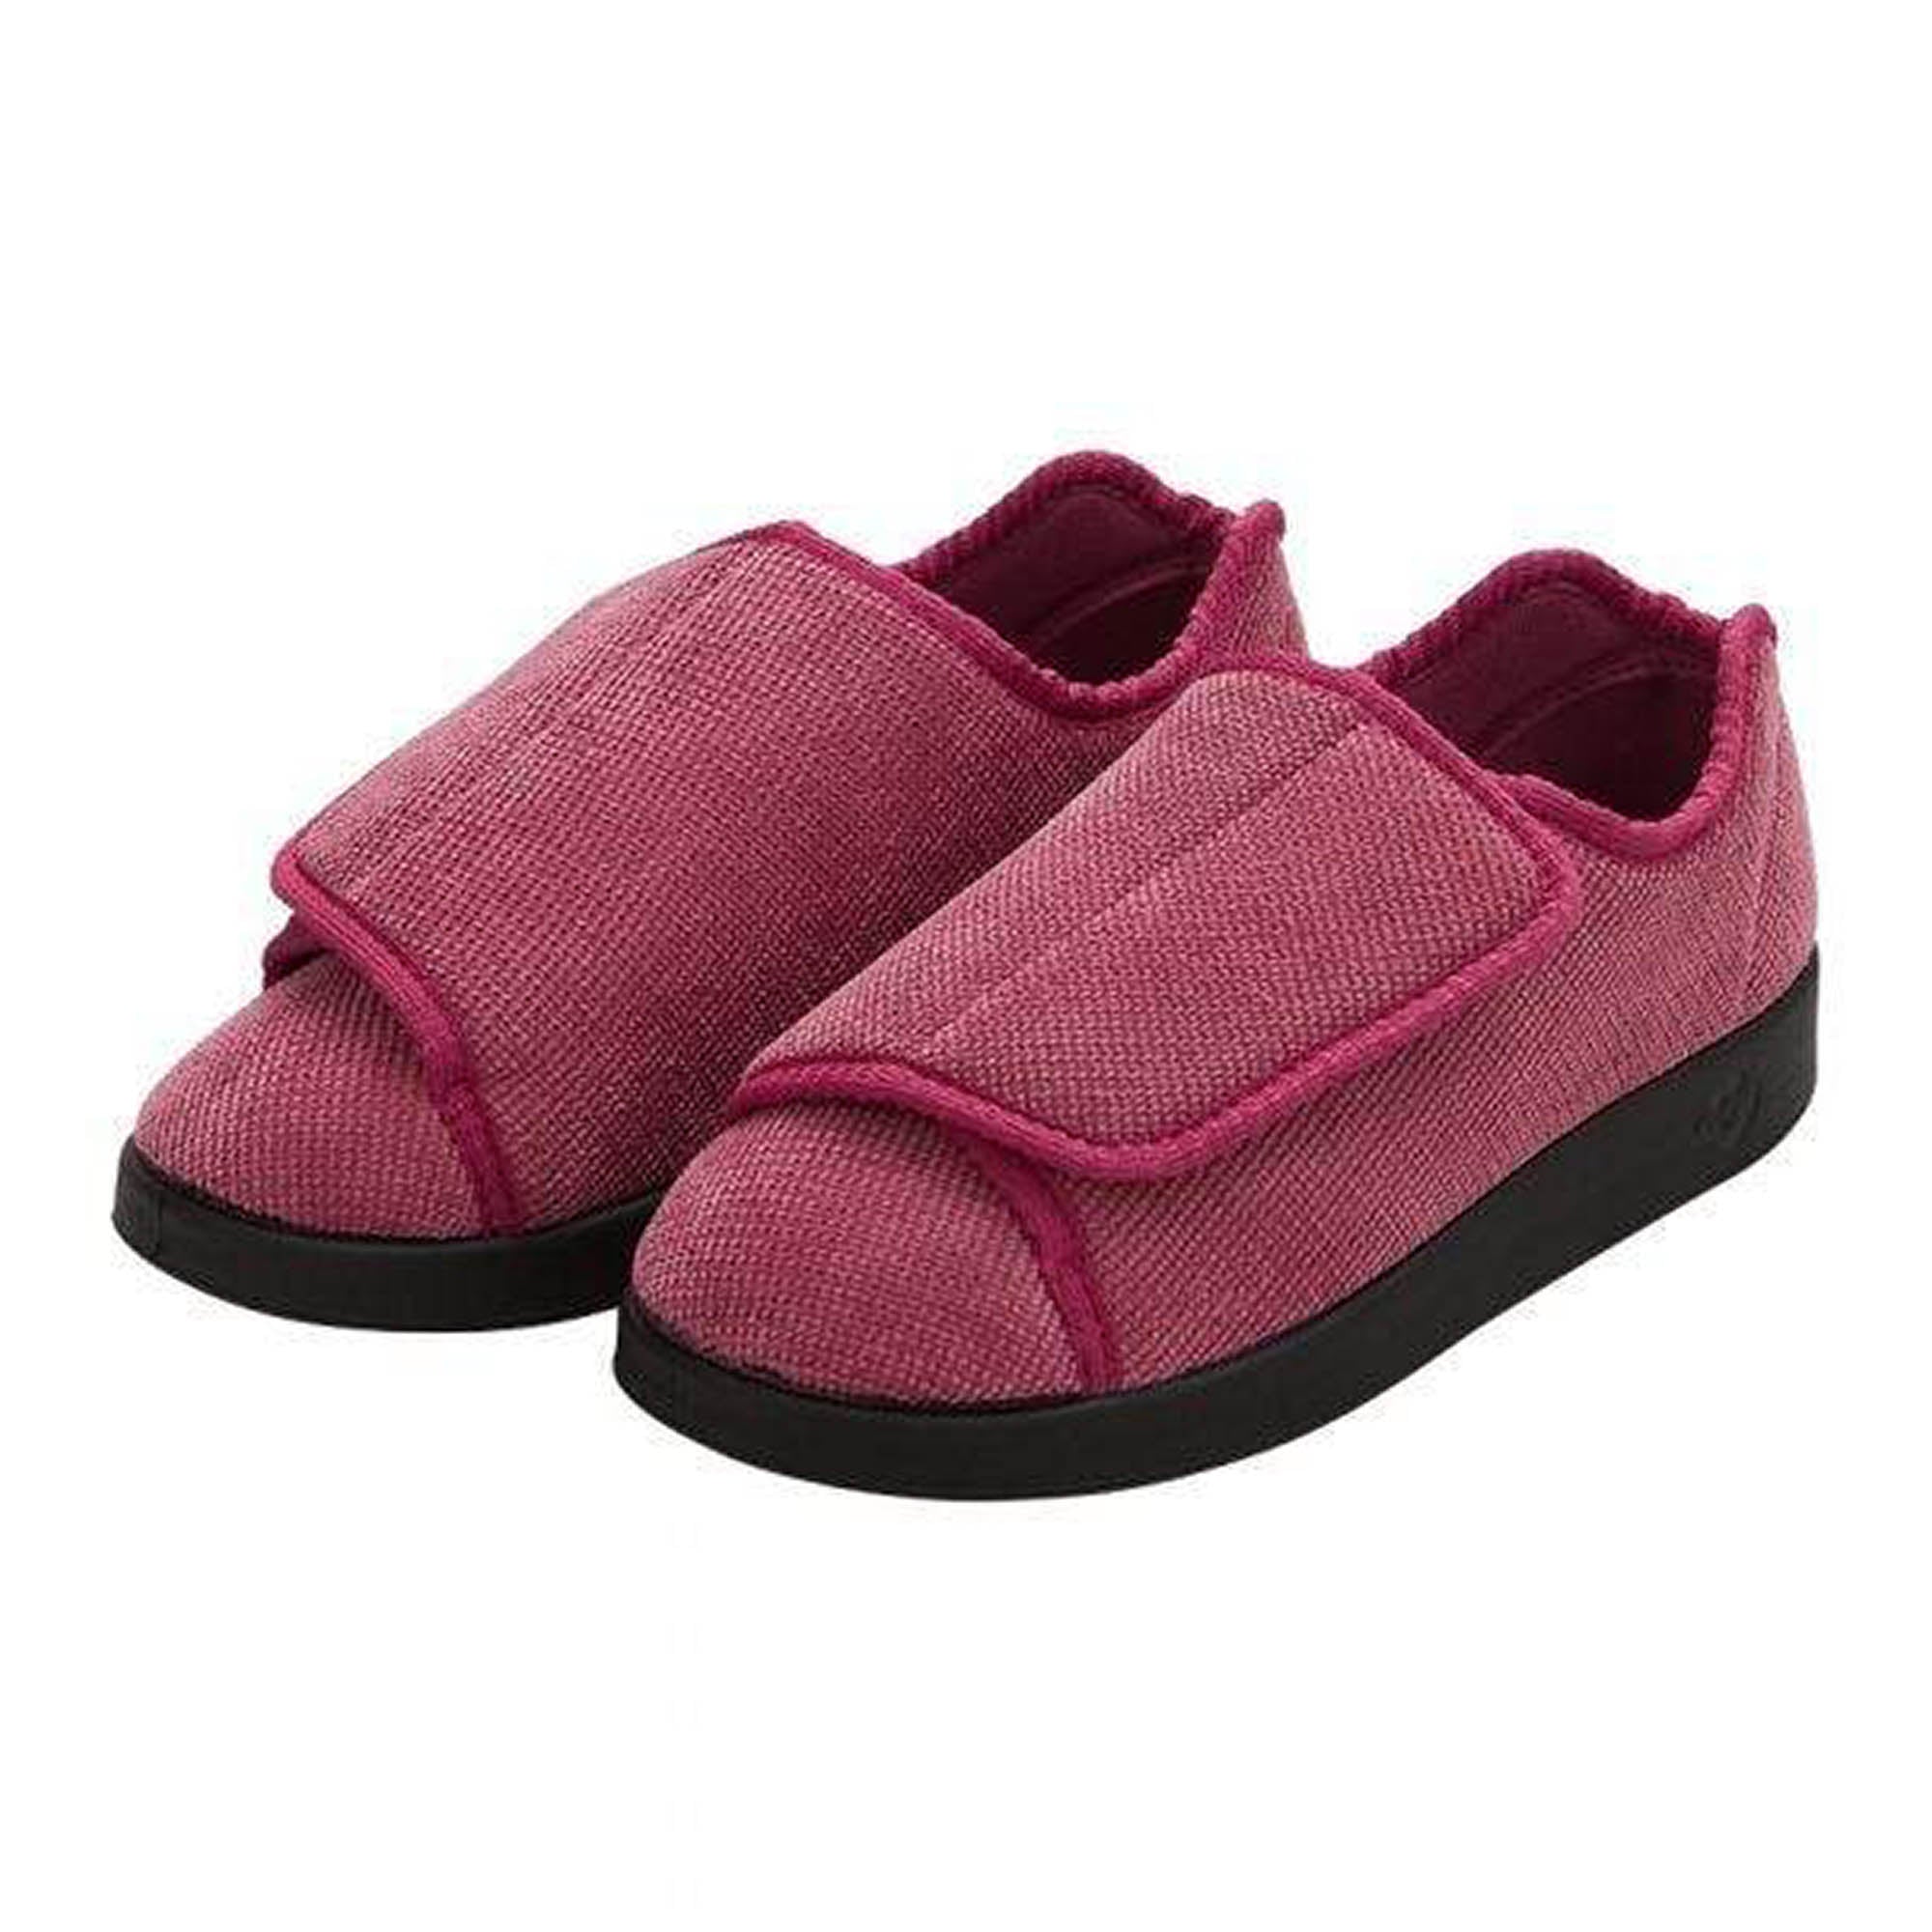 Silverts Women's Antimicrobial Extra Extra Wide Easy-Closure Slippers - Dusty Rose - 9